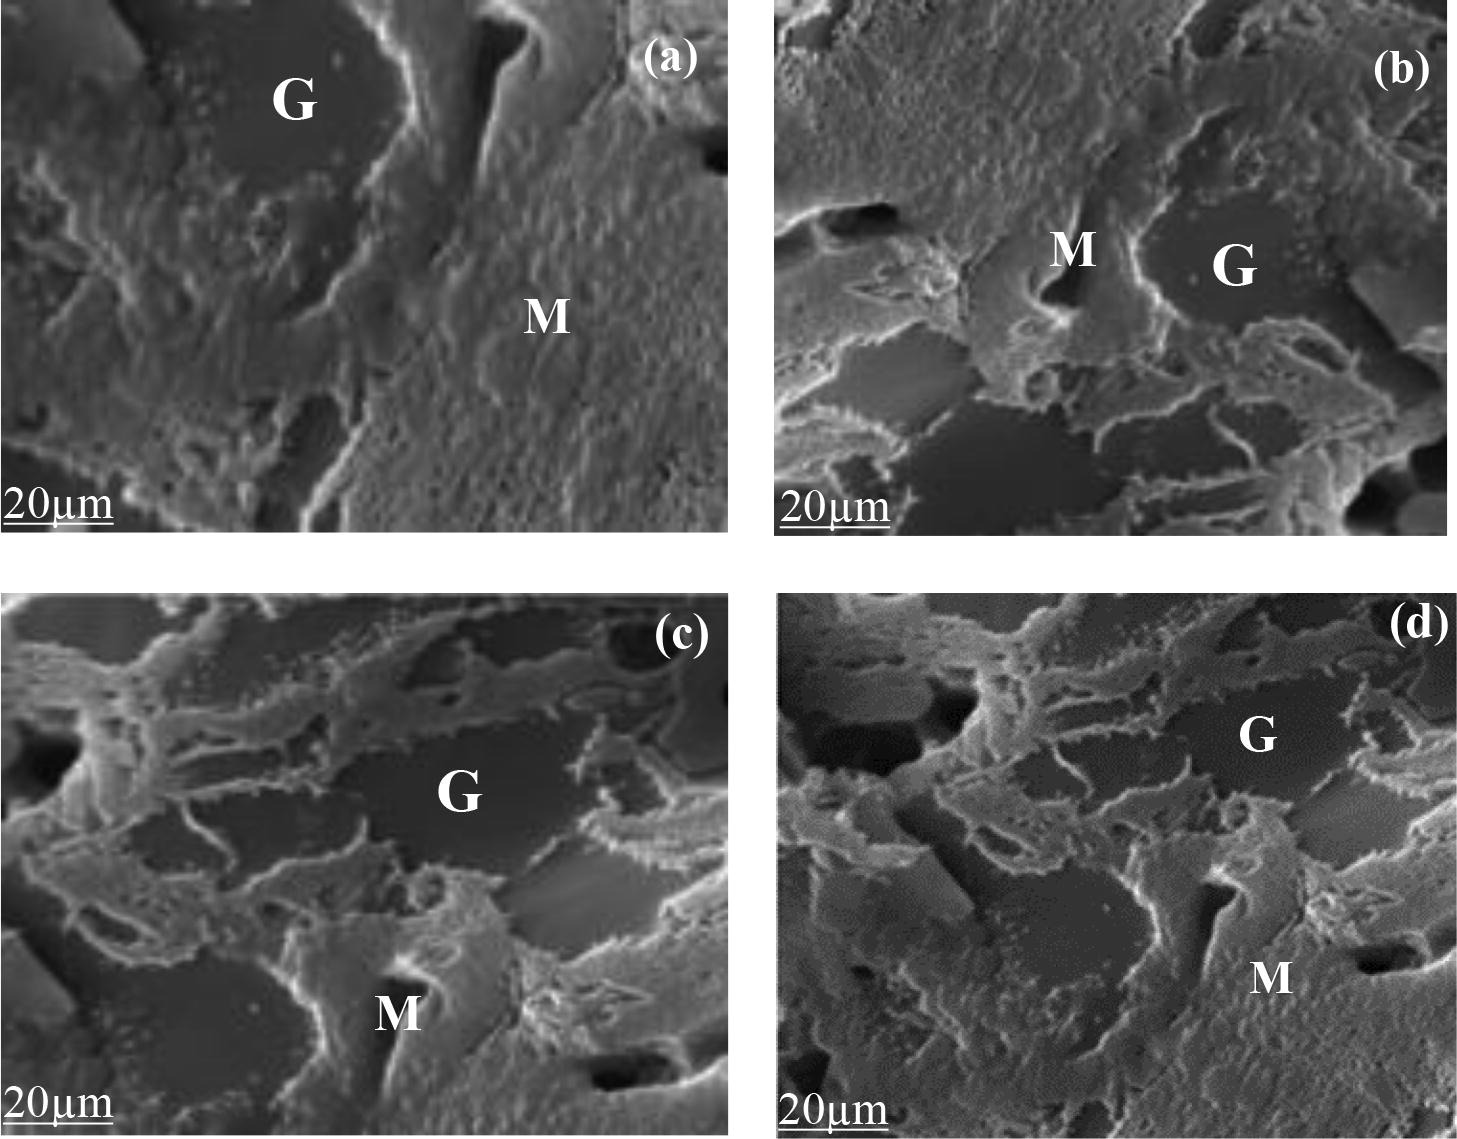 SEM micrographs of ceramic samples with a) 30 wt% of GP b) 35 wt% of GP c) 40 wt% of GP and d) 45 wt% of GP fired 1200 °C showing glass (G) and mullite (M) phase.